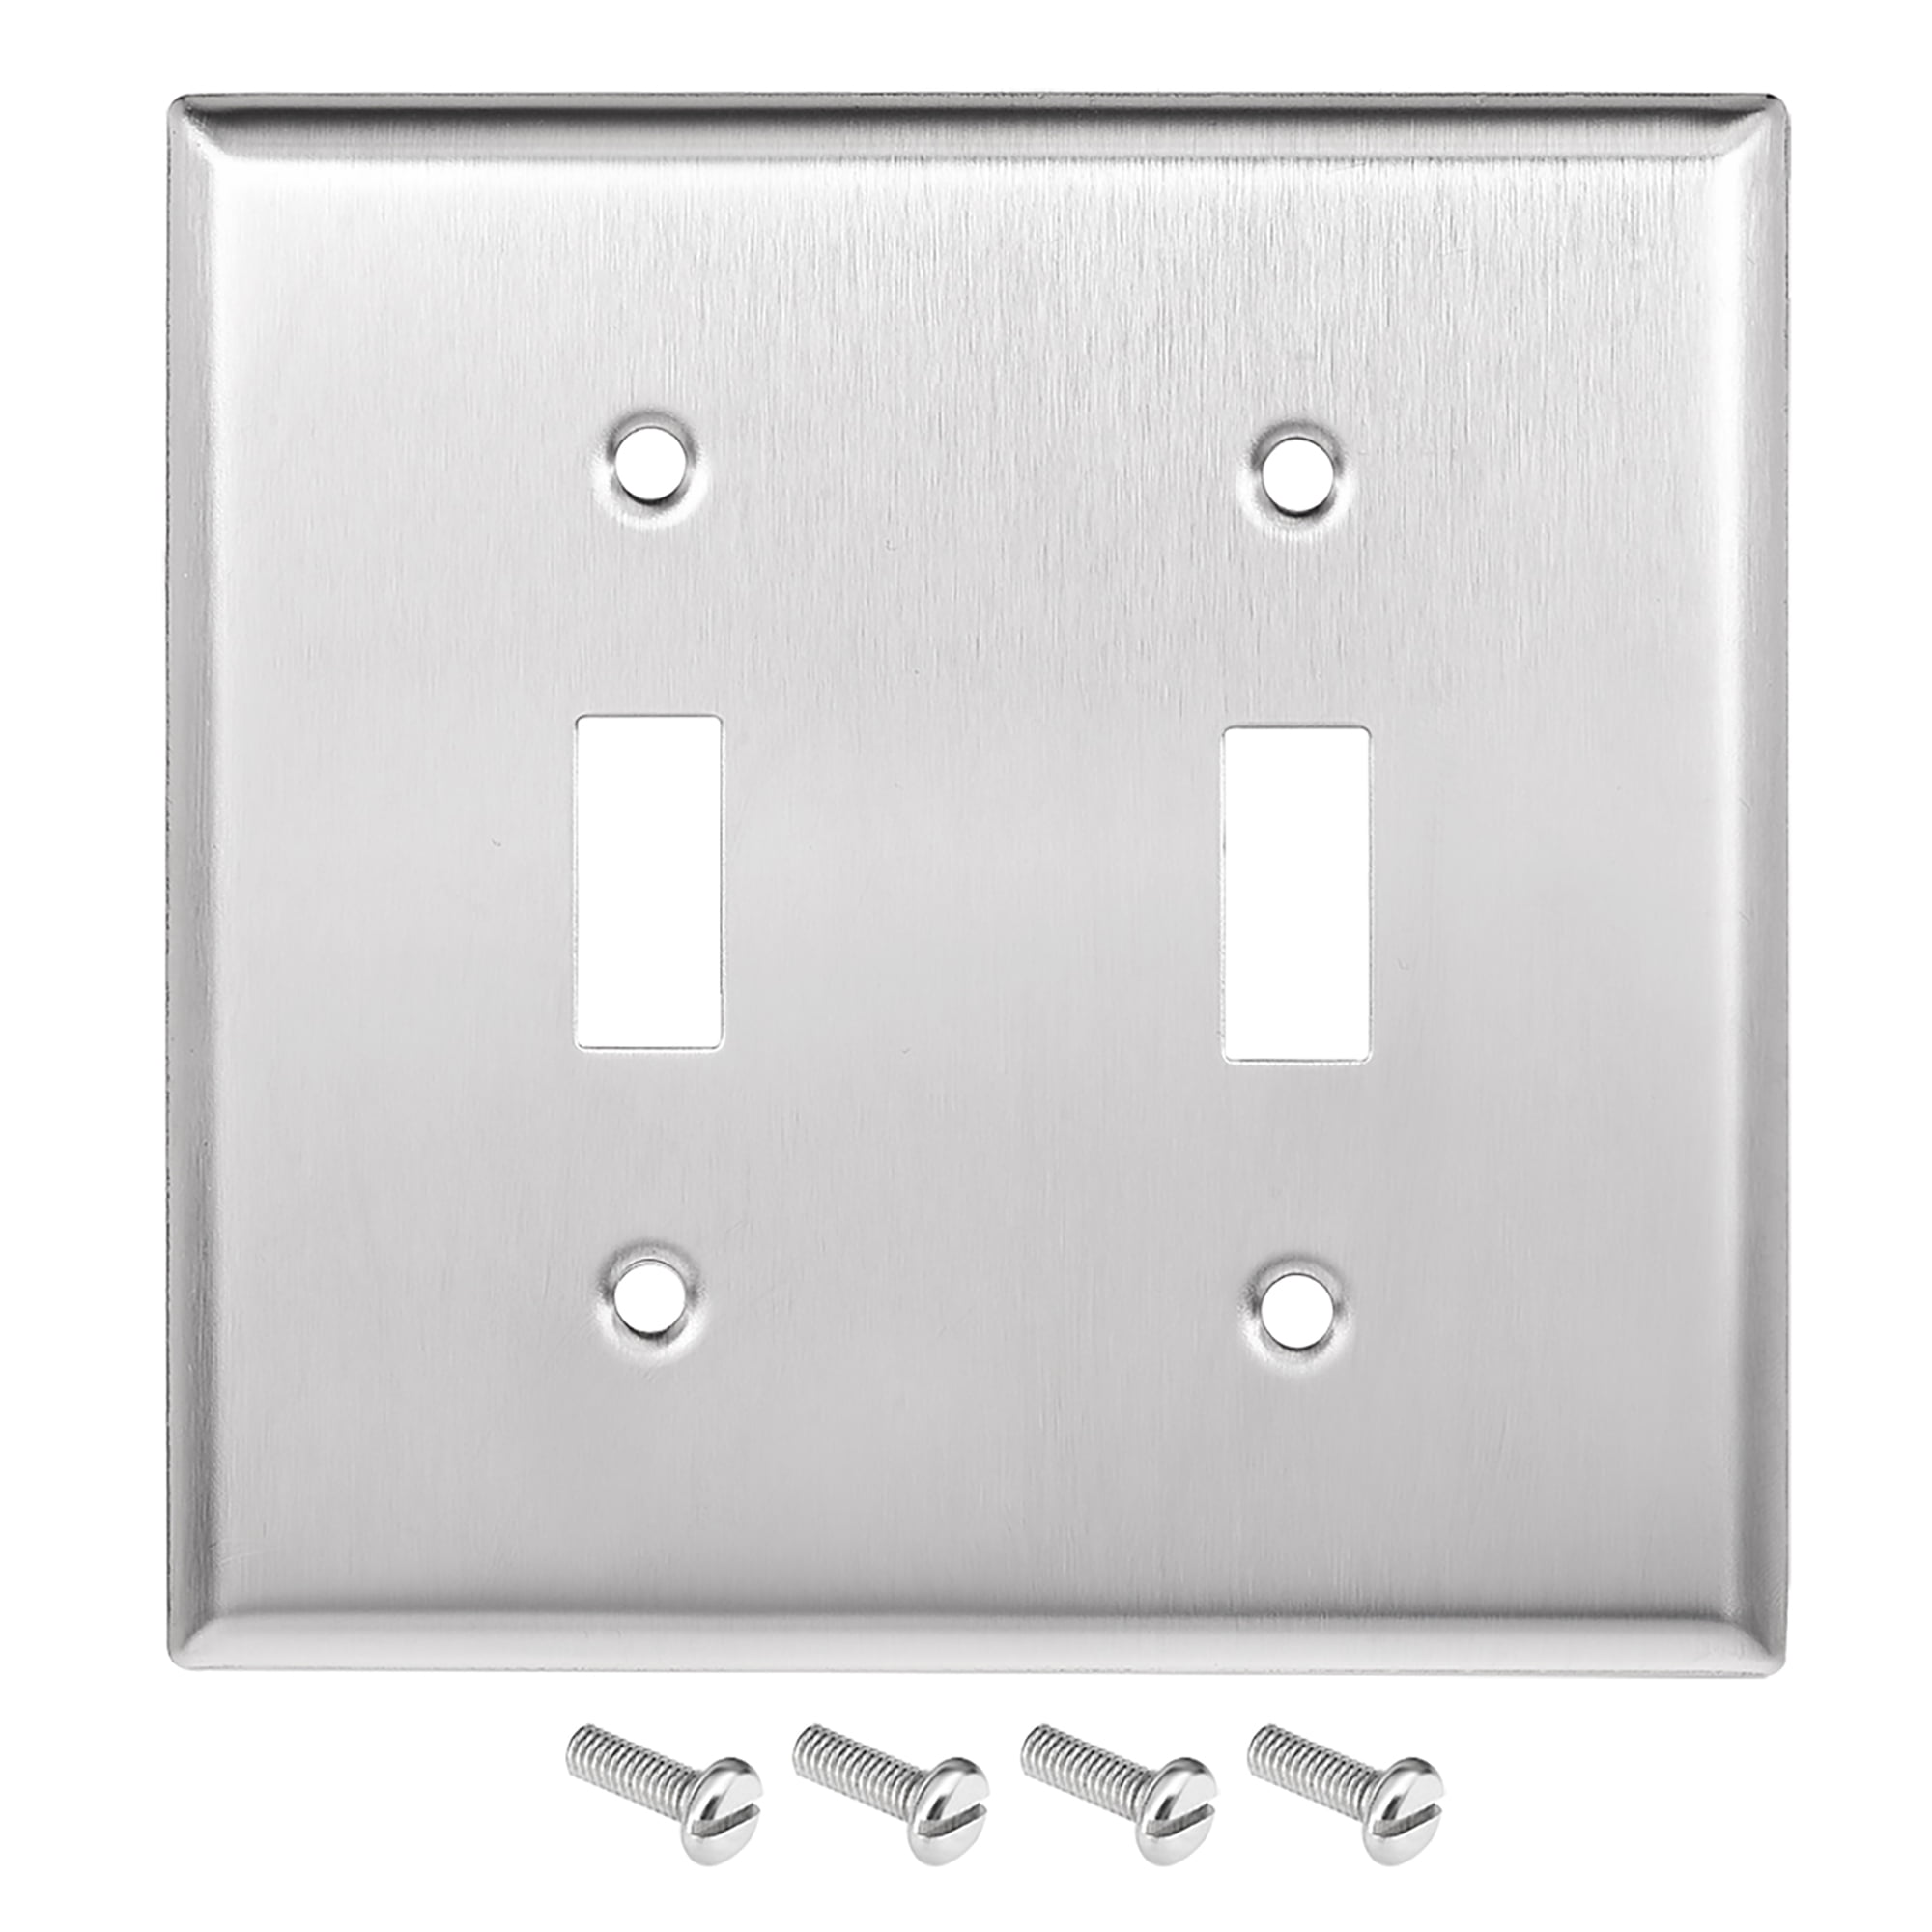 SS2 Hubbell Wallplate 2-gang Switch Stainless Steel for sale online 